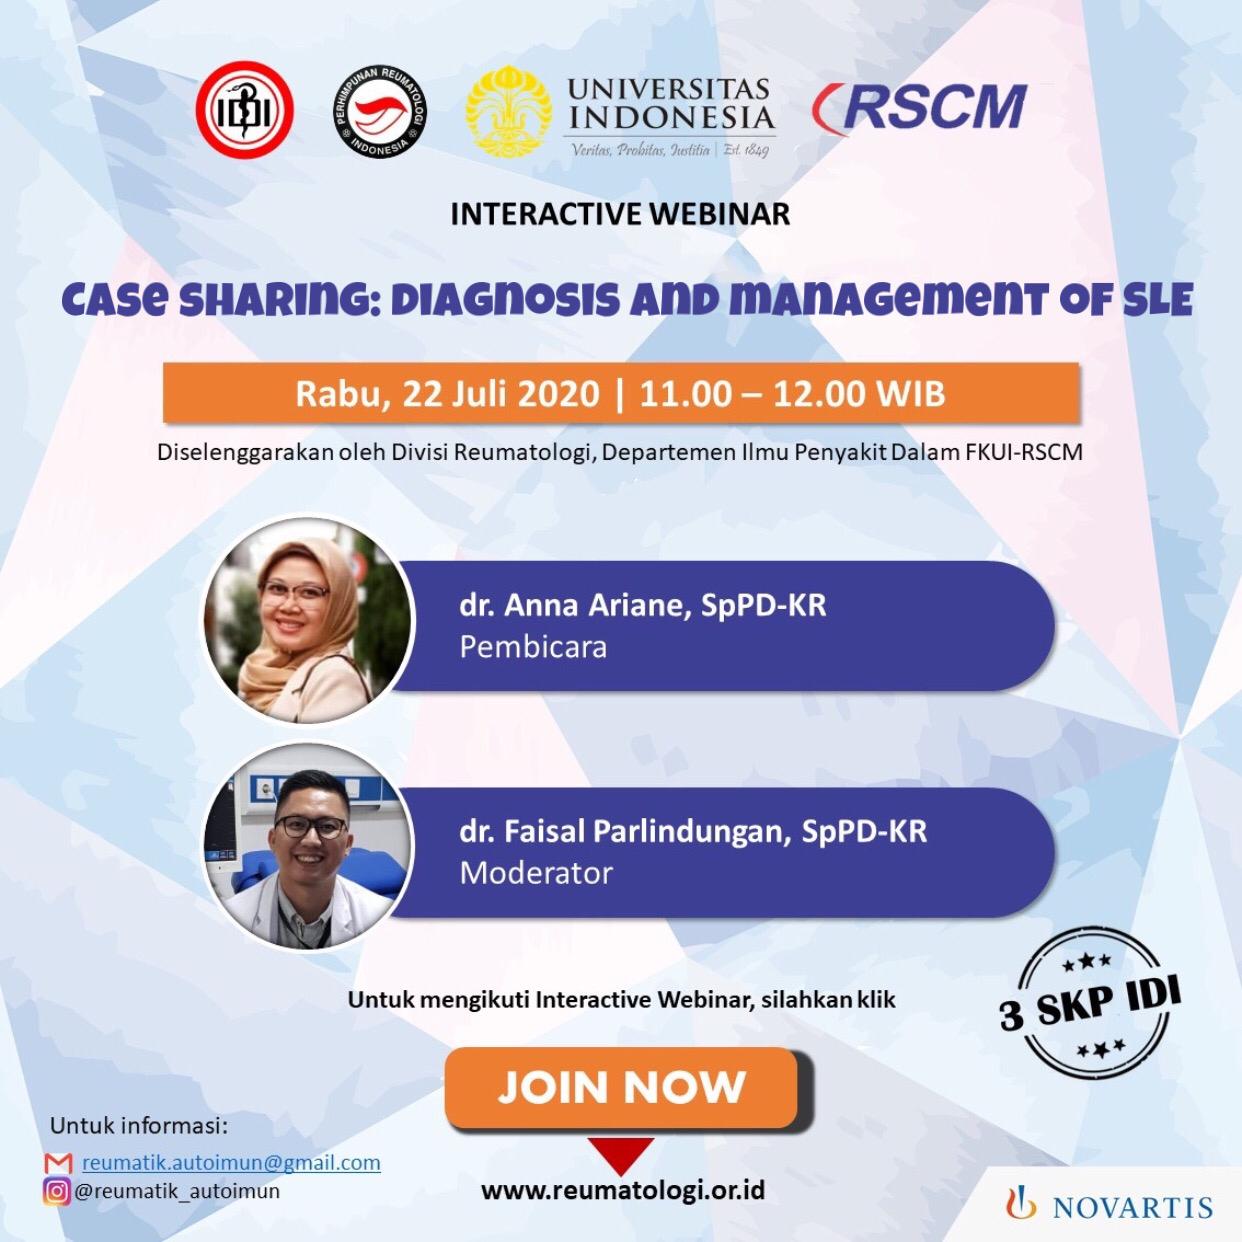 Case Sharing registration: diagnosis and management of SLE